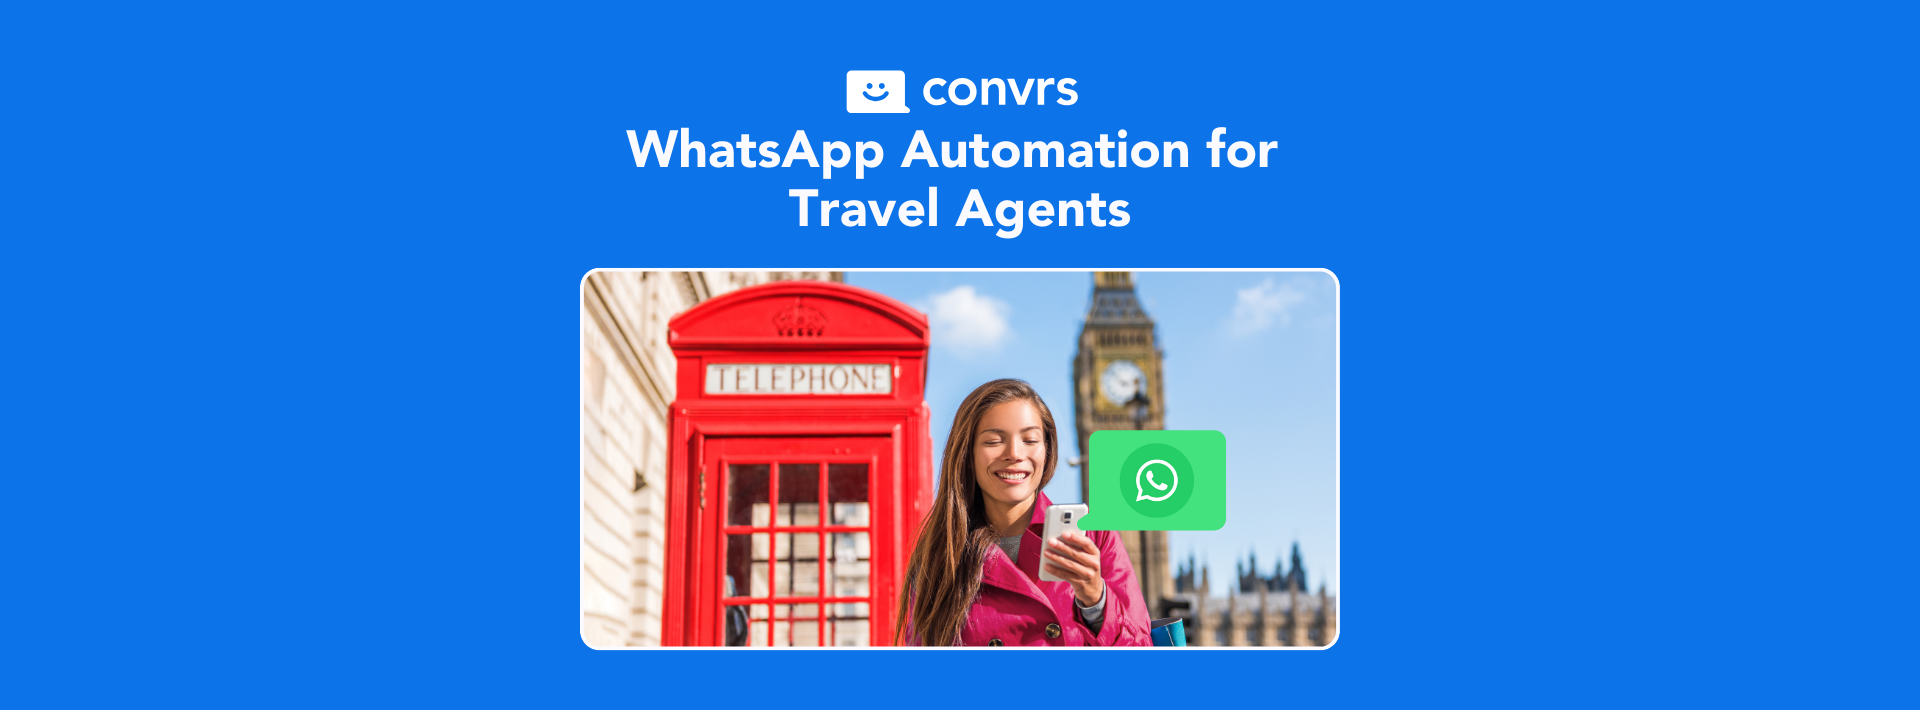 Woman traveling receives a WhatsApp automated message from a travel agency